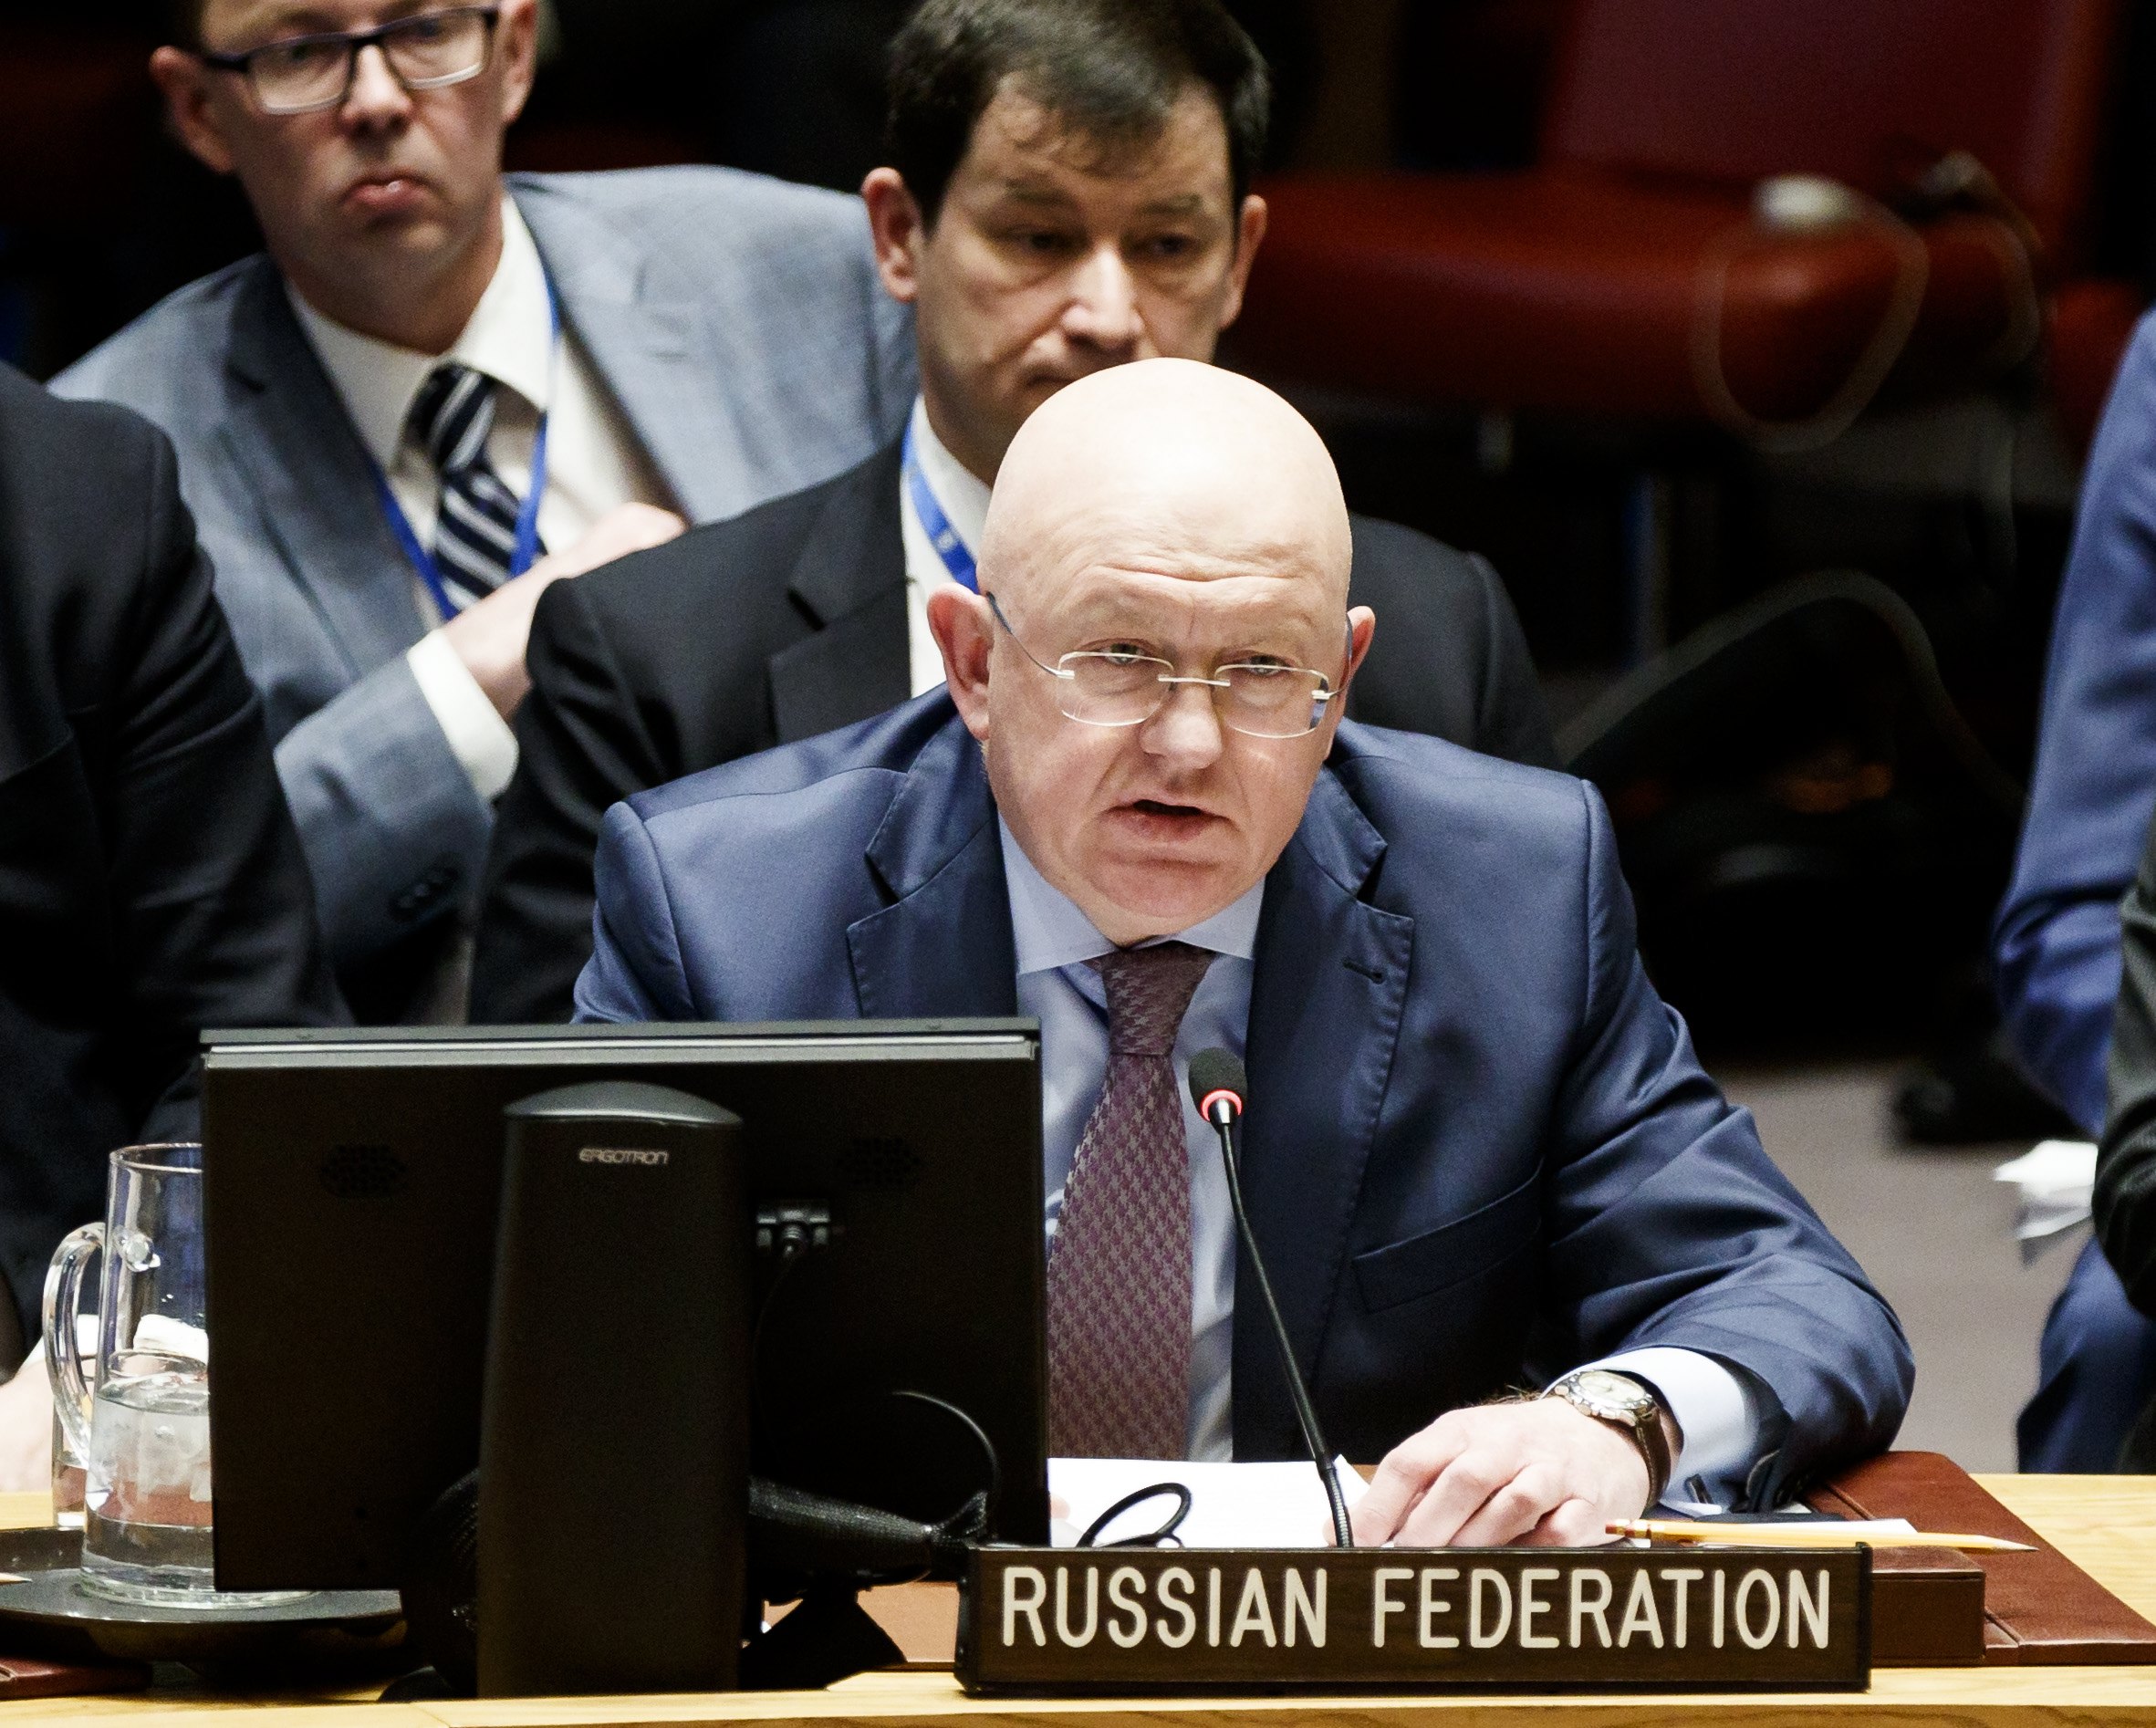 epa06657868 Vassily Nebenzia (C), Russia's Permanent Representative to the United Nations, addresses an emergency United Nations Security Council meeting in response to a suspected chemical weapons attack in Syria at United Nations headquarters in New York, New York, USA, 09 April 2018. The suspected chemical attack took place over weekend in the Damascus suburb of Douma, killing at least 49 people.  EPA/JUSTIN LANE